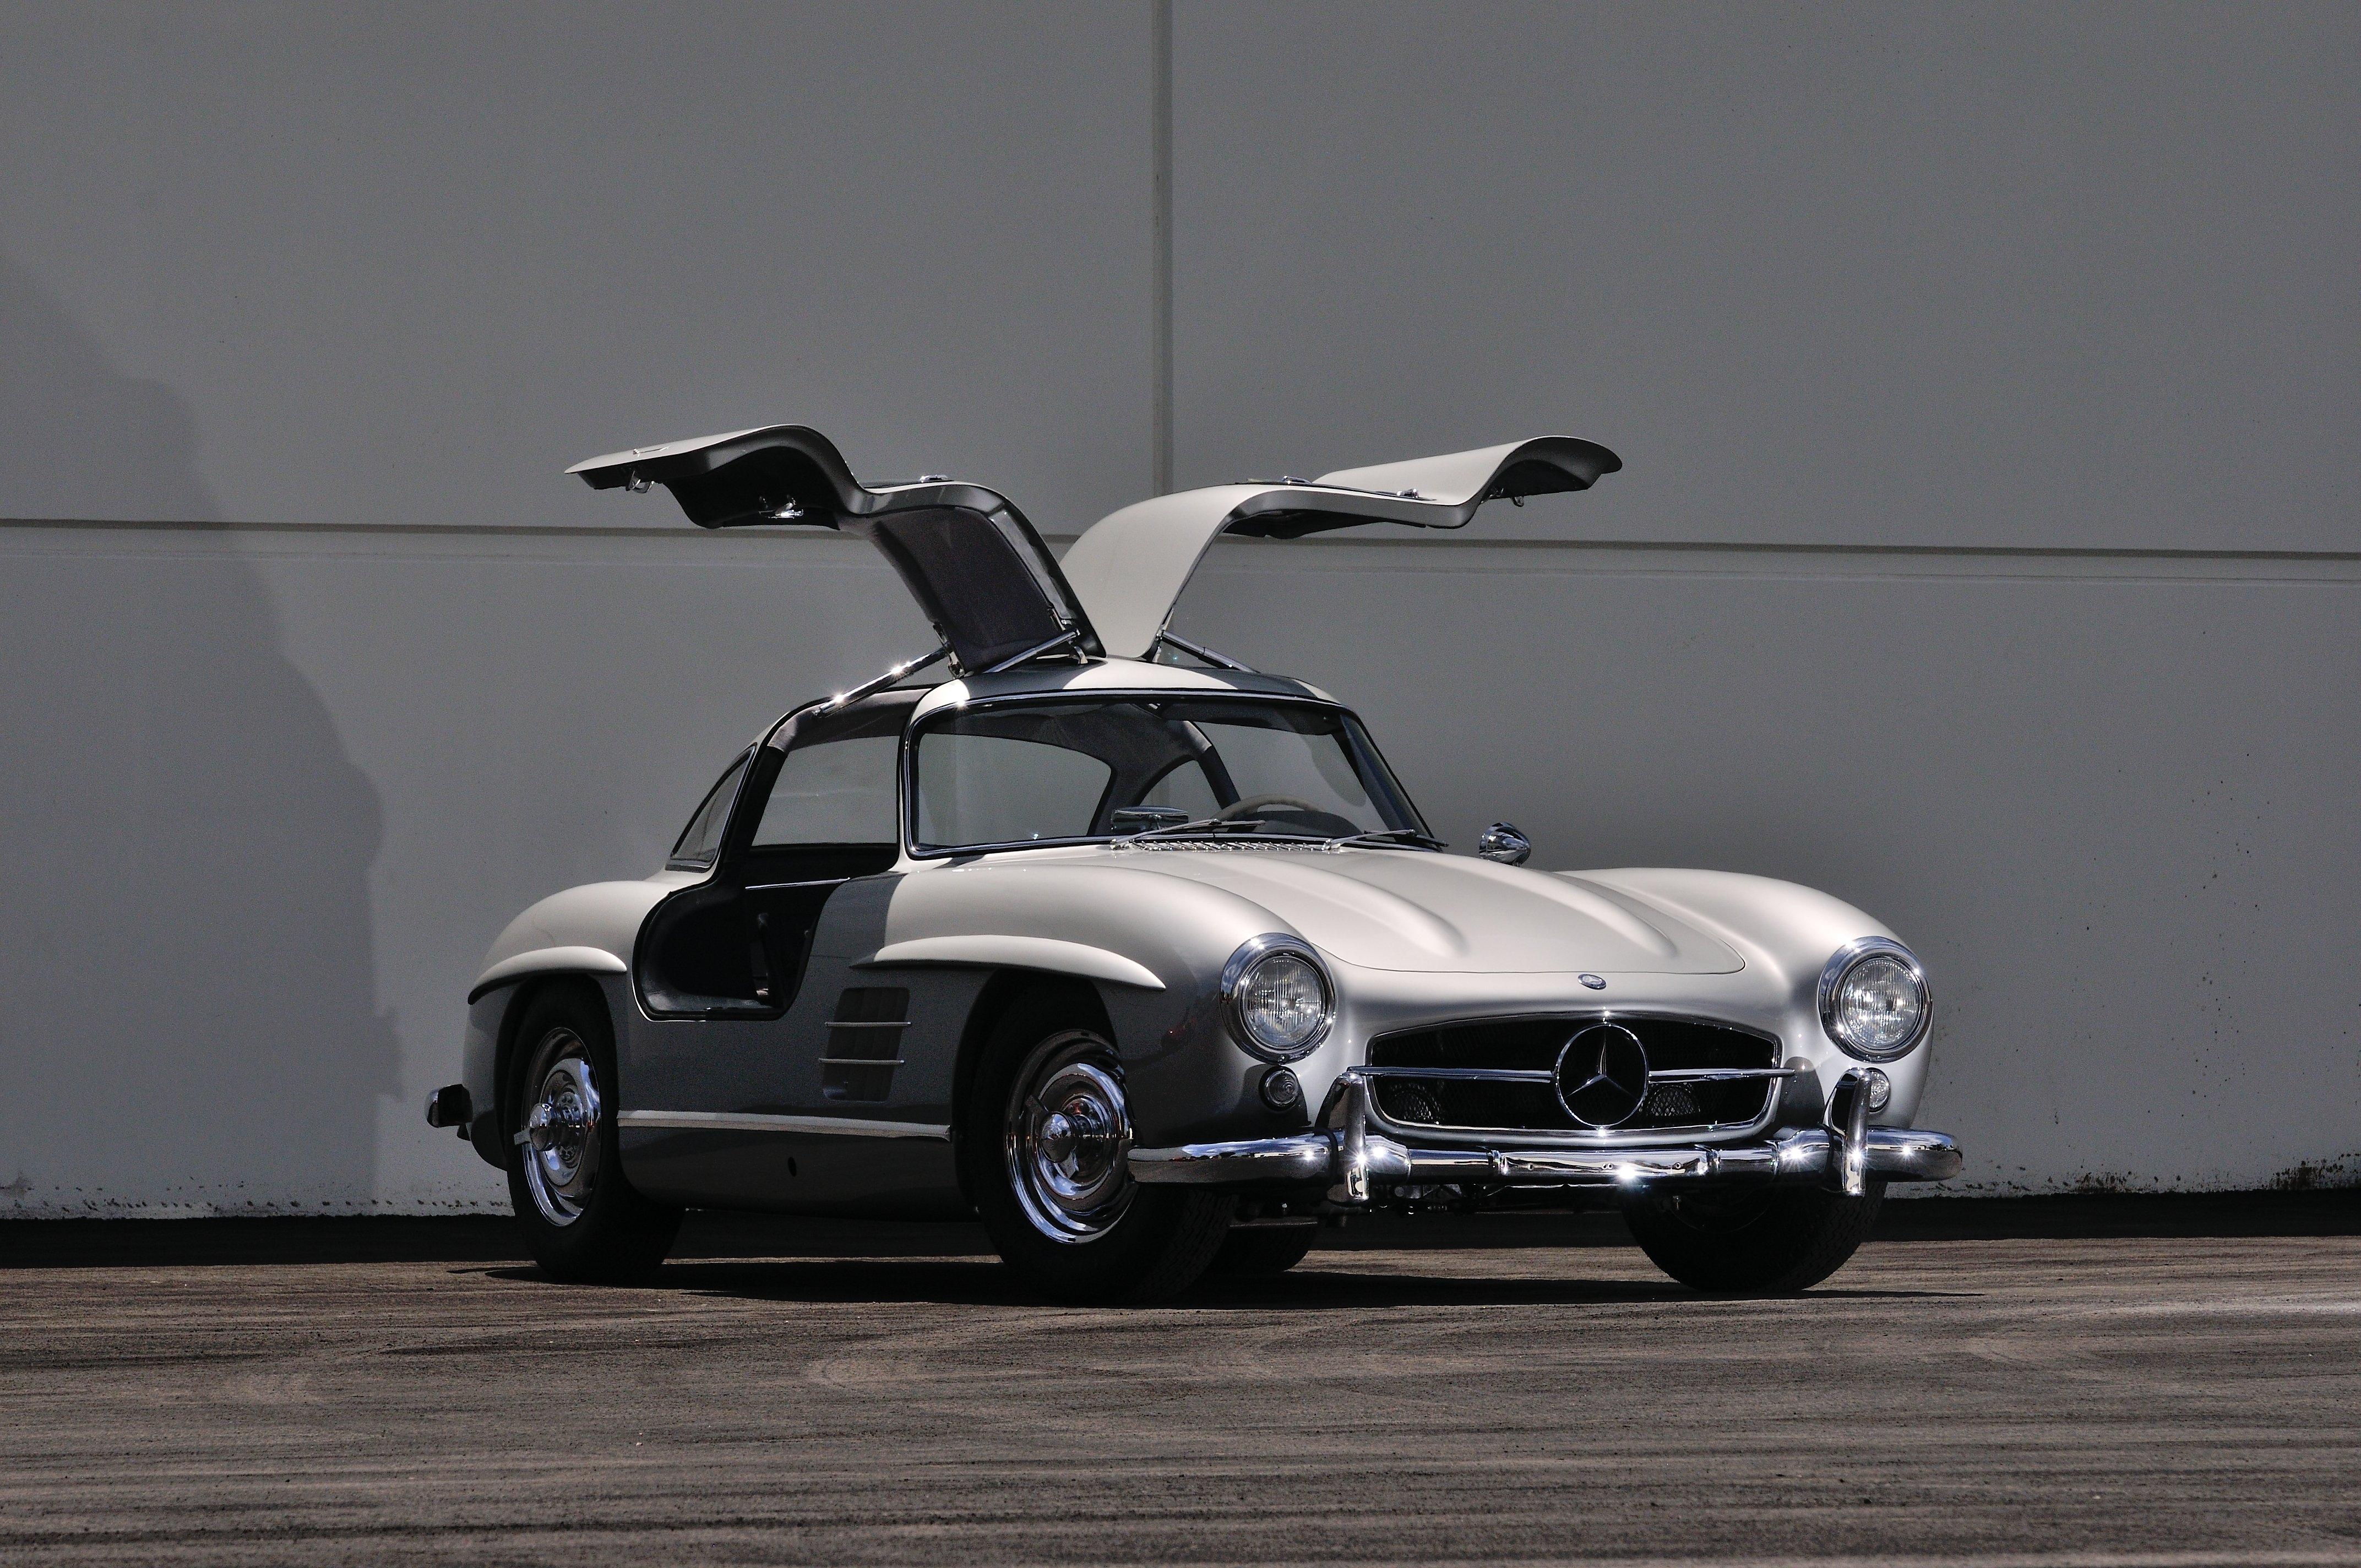 Mercedes Benz 300SL Gullwing Sport Classic Old Vintage